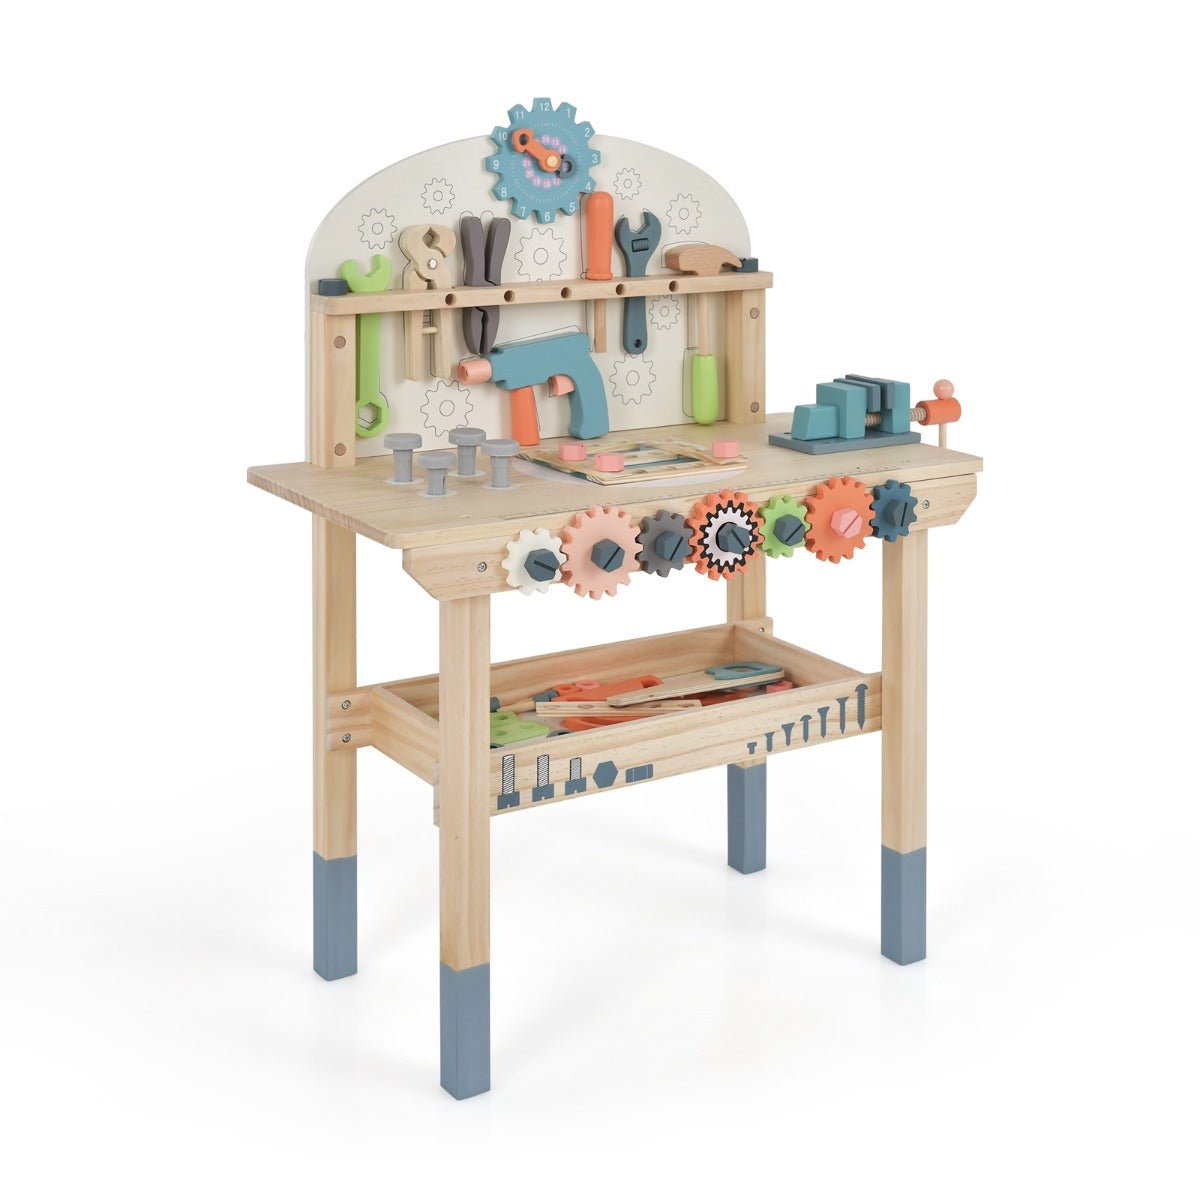 A World of Imagination in Our Tool Bench Playset